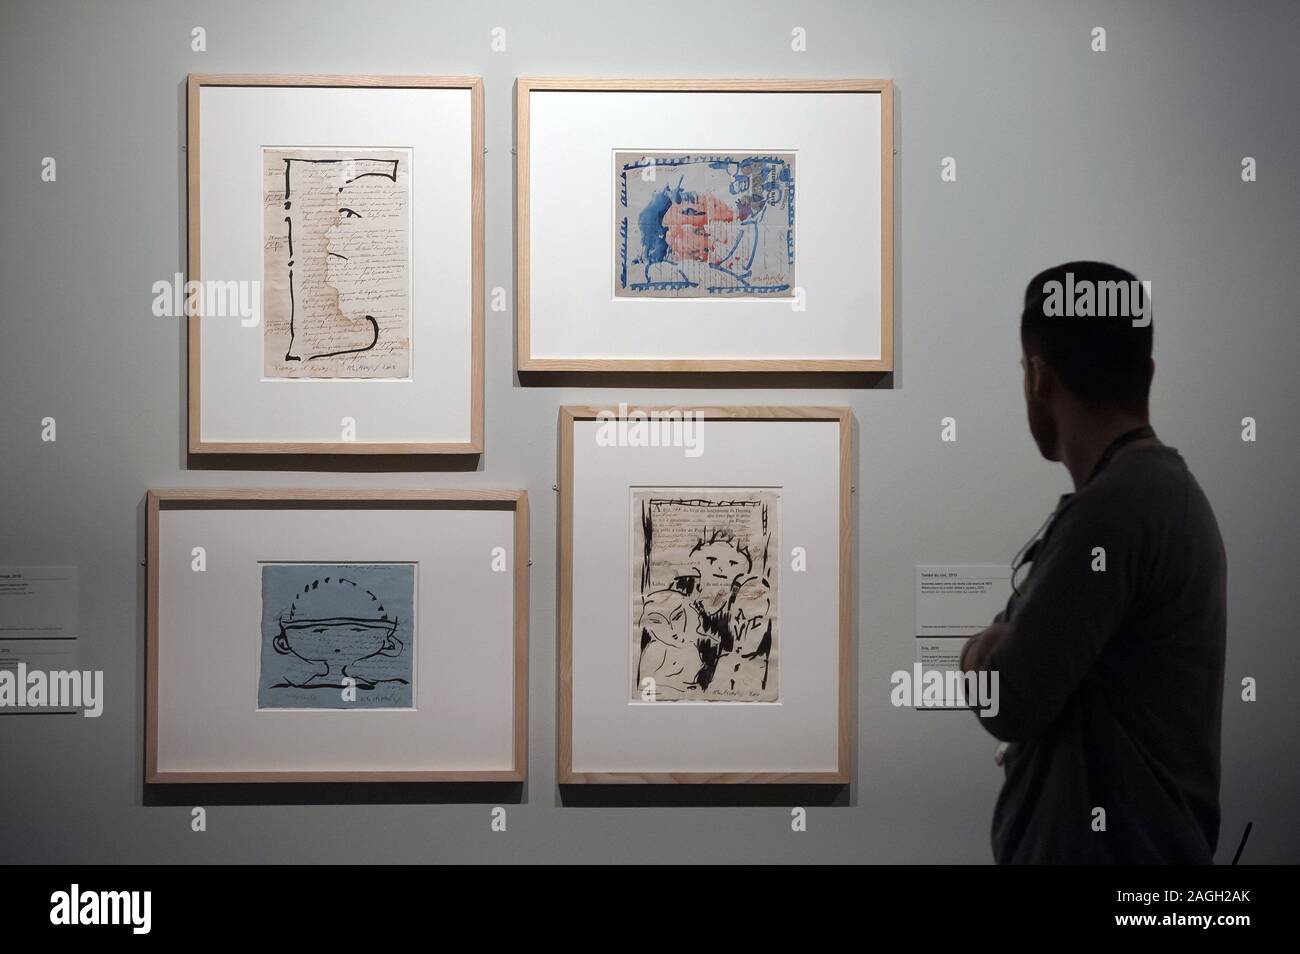 A worker looking at paintings and drawings during the exhibition.'Alechinsky: en el país de la tinta' (Alechinsky in inkland) is an exhibition of paintings and drawings by Belgian artist, Pierre Alechinsky at museum Centre Pompidou. The exhibition runs from 19th Dec 2019 to 12th April 2020. Stock Photo